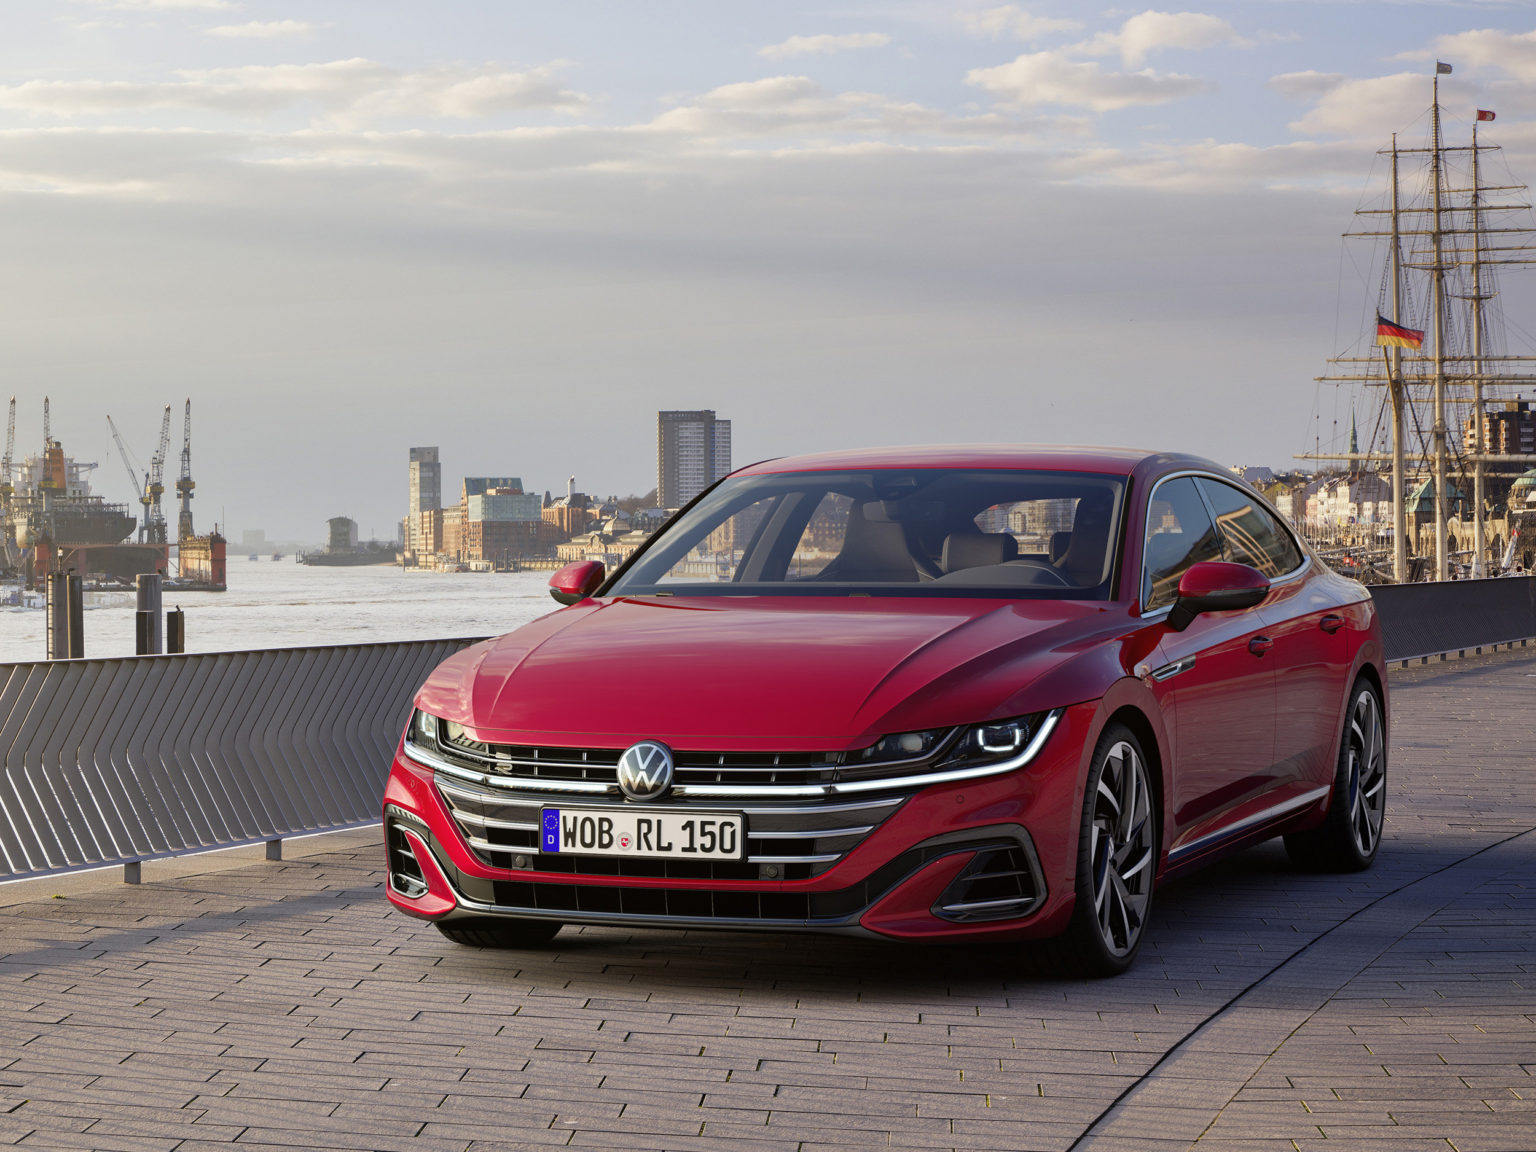 Volkswagen has given the Arteon a signficant refresh for the 2021 model year.